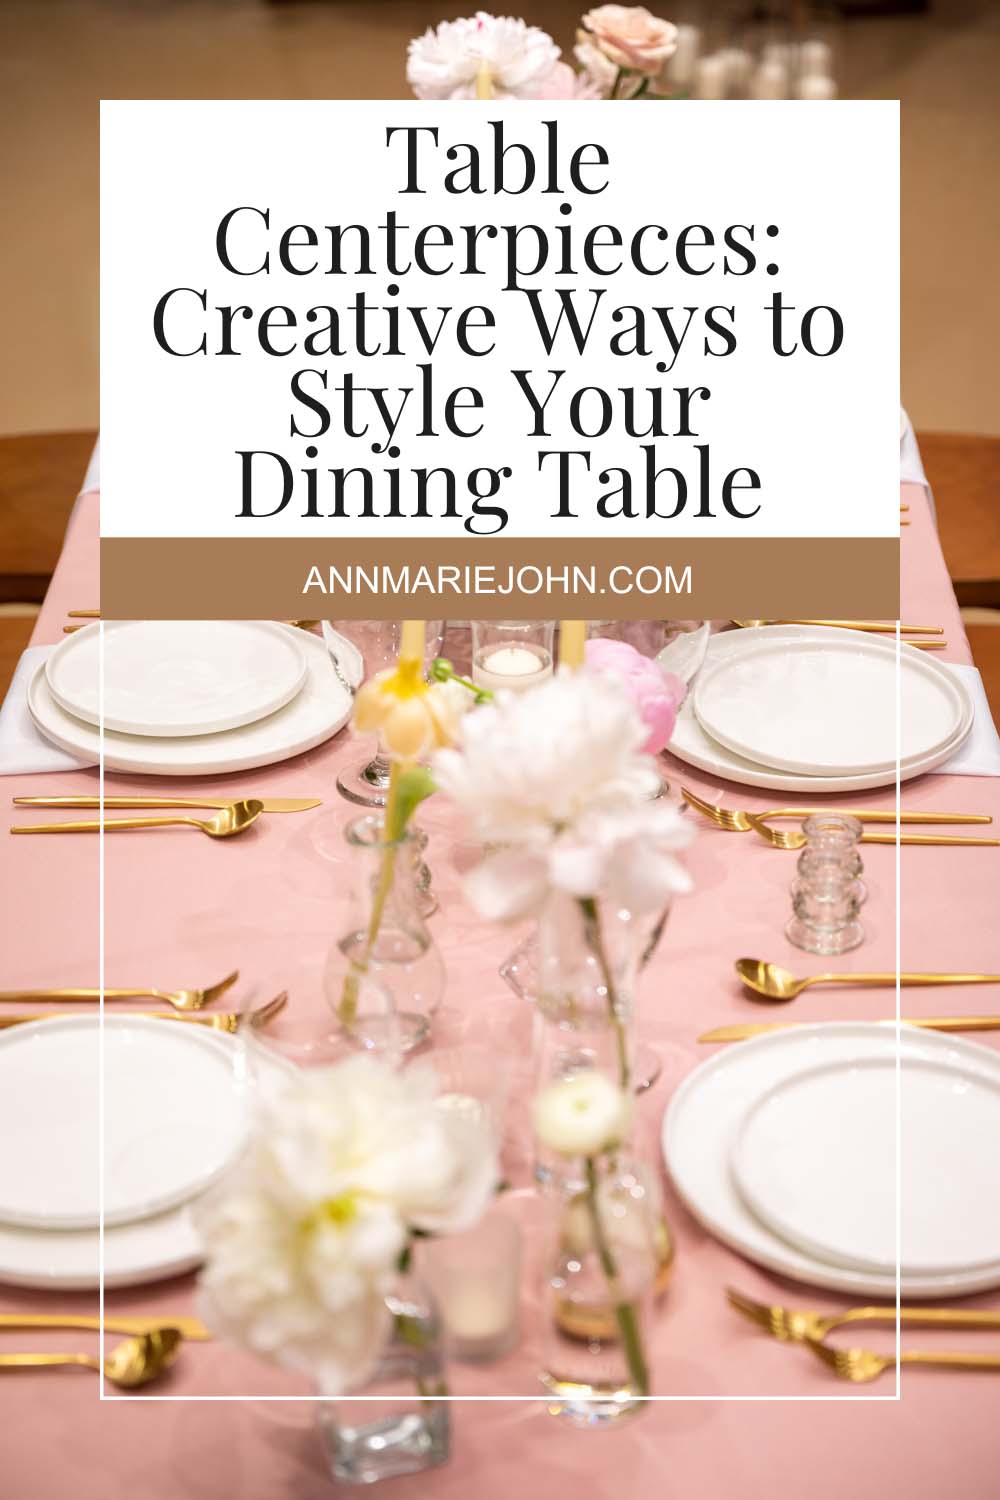 Table Centerpieces: Creative Ways to Style Your Dining Table